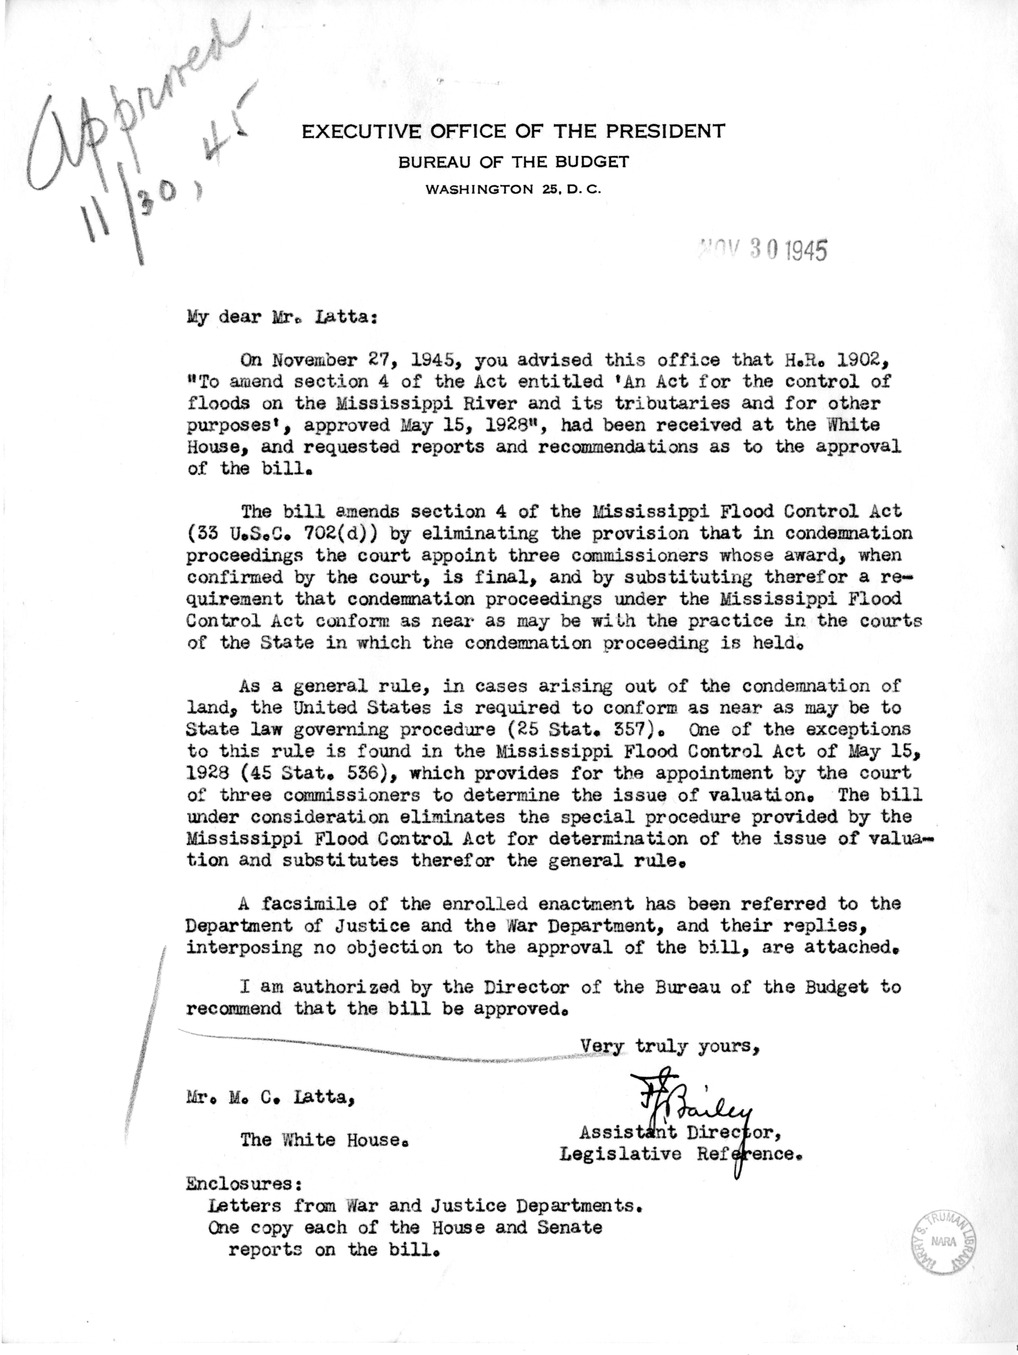 Memorandum from Frederick J. Bailey to M. C. Latta, H.R. 1902, To Amend Section 4 of the Act Entitled 'An Act for the Control of Floods on the Mississippi River and Its Tributaries and for Other Purposes', Approved May 15, 1928, with Attachments